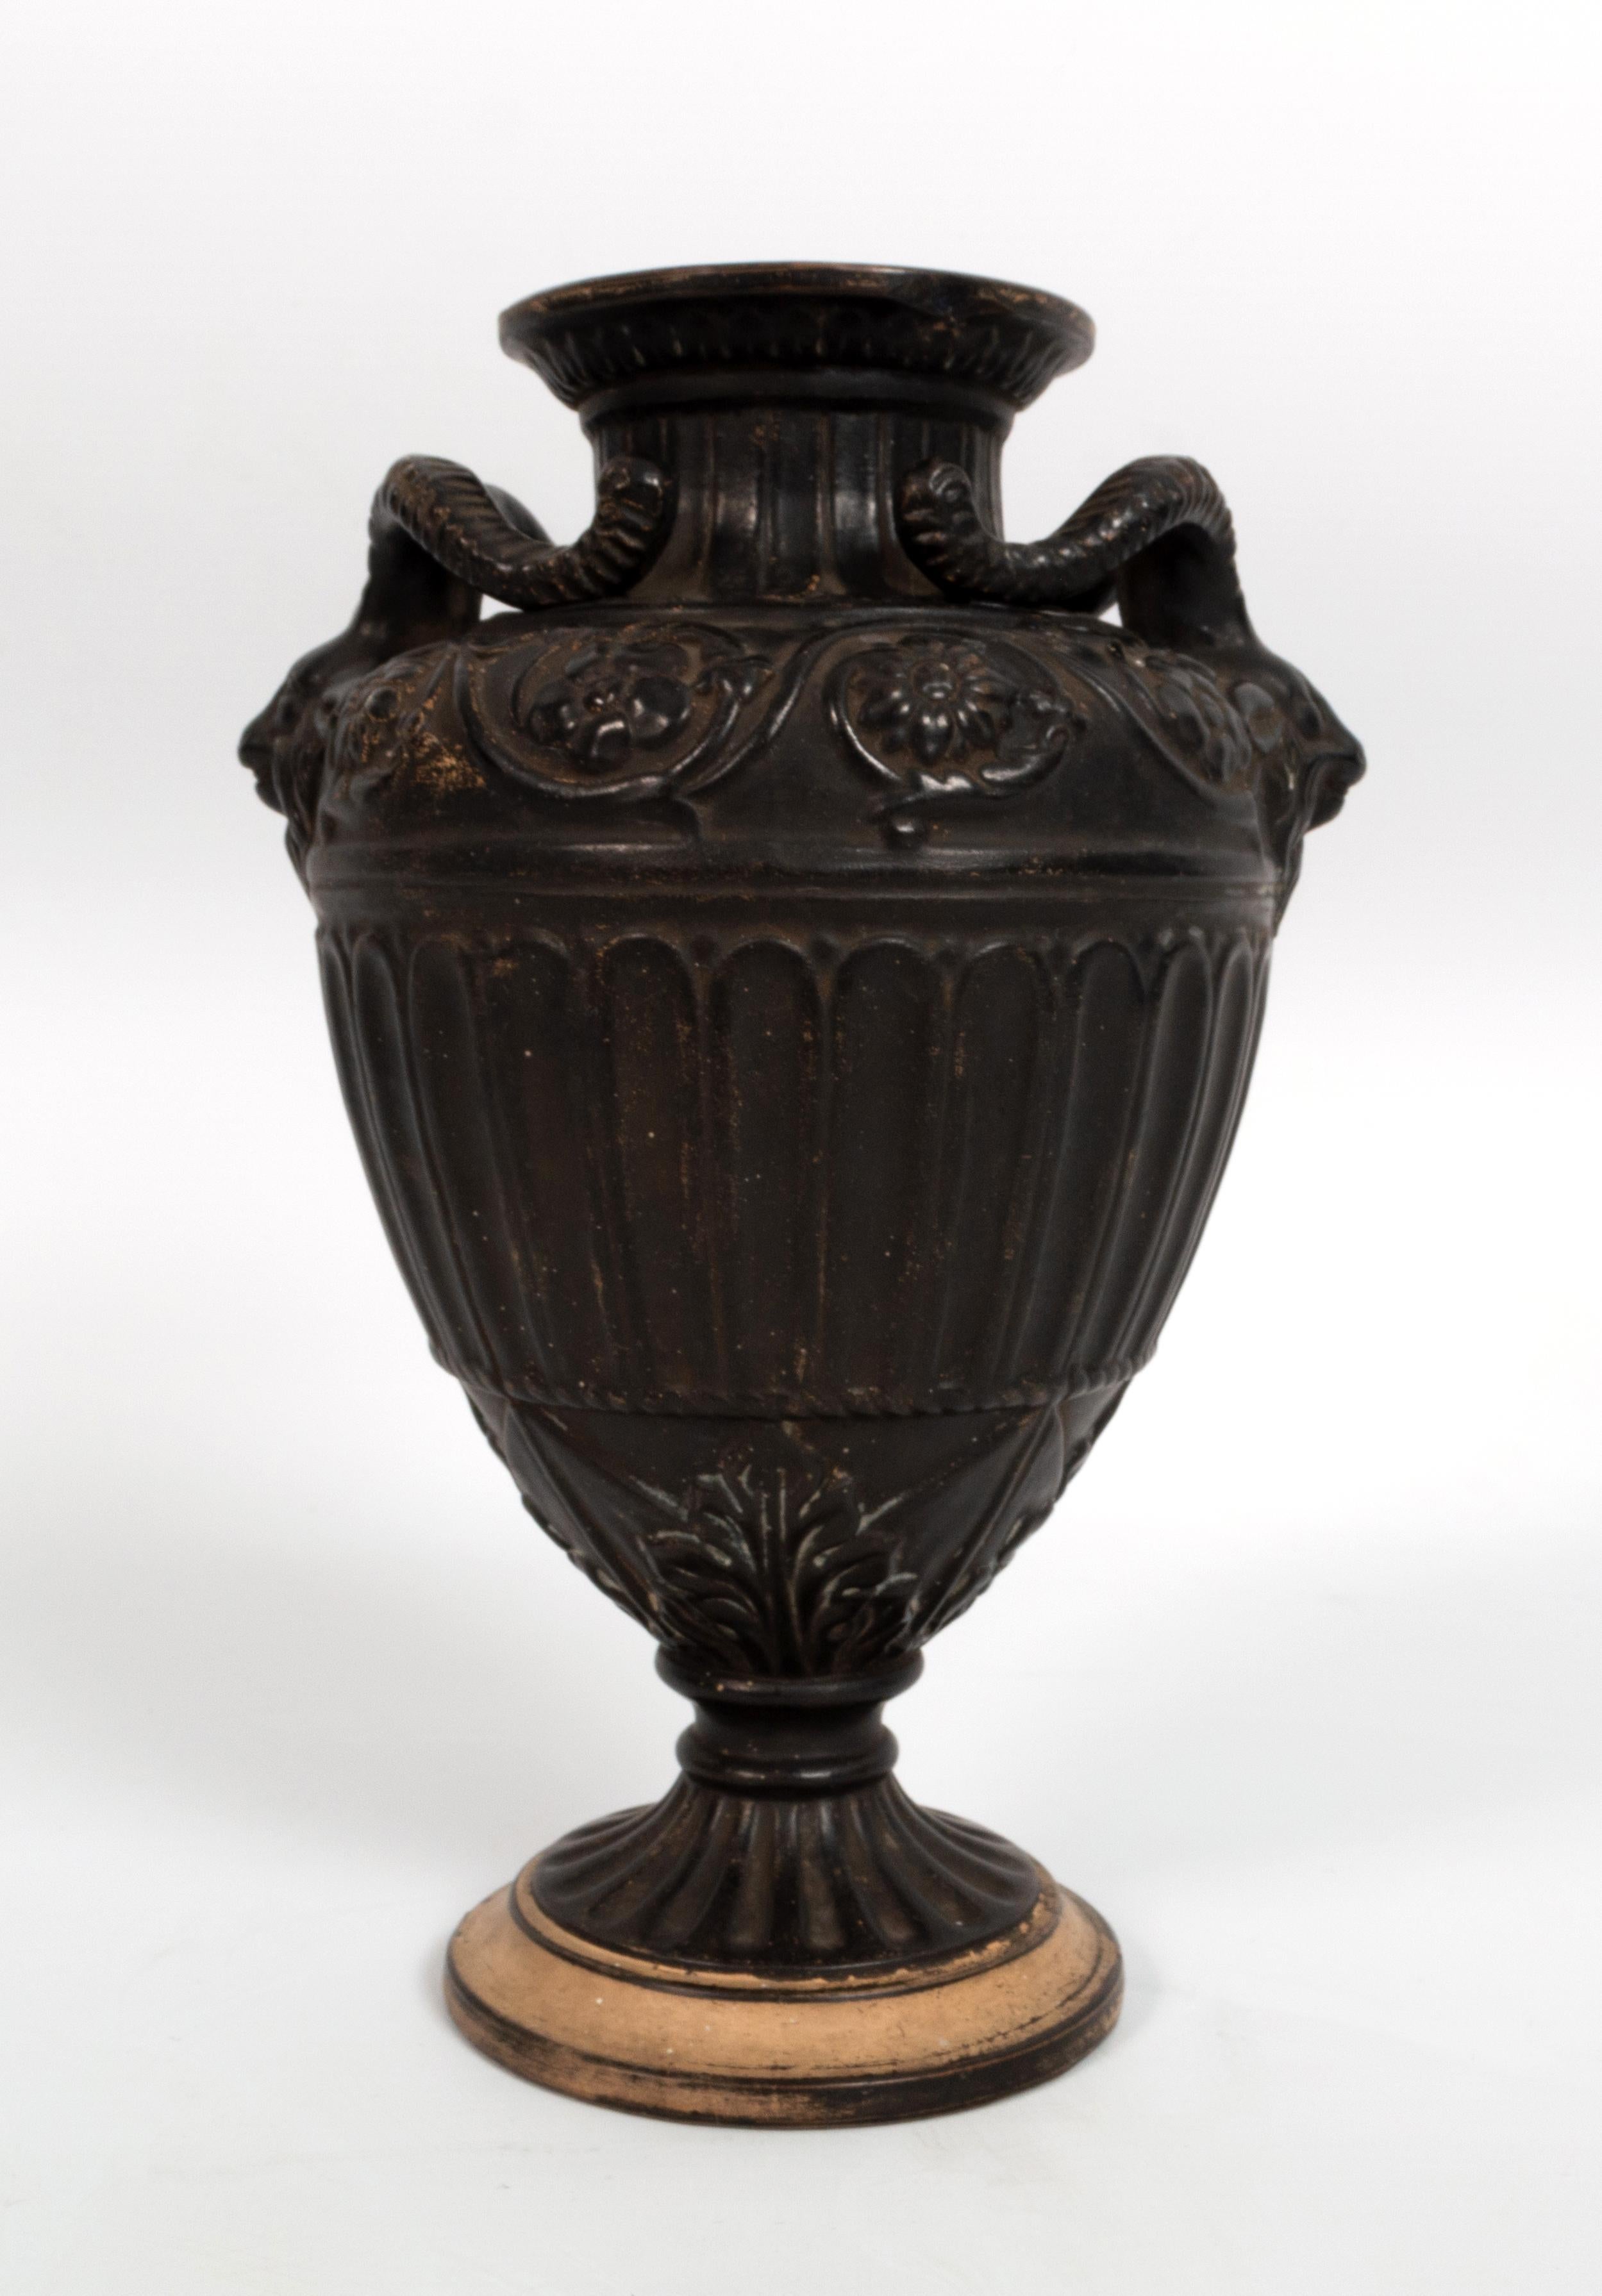 Antique 19th Century Neoclassical Vase By Gerbing & Stephan, Germany, 1892 For Sale 4